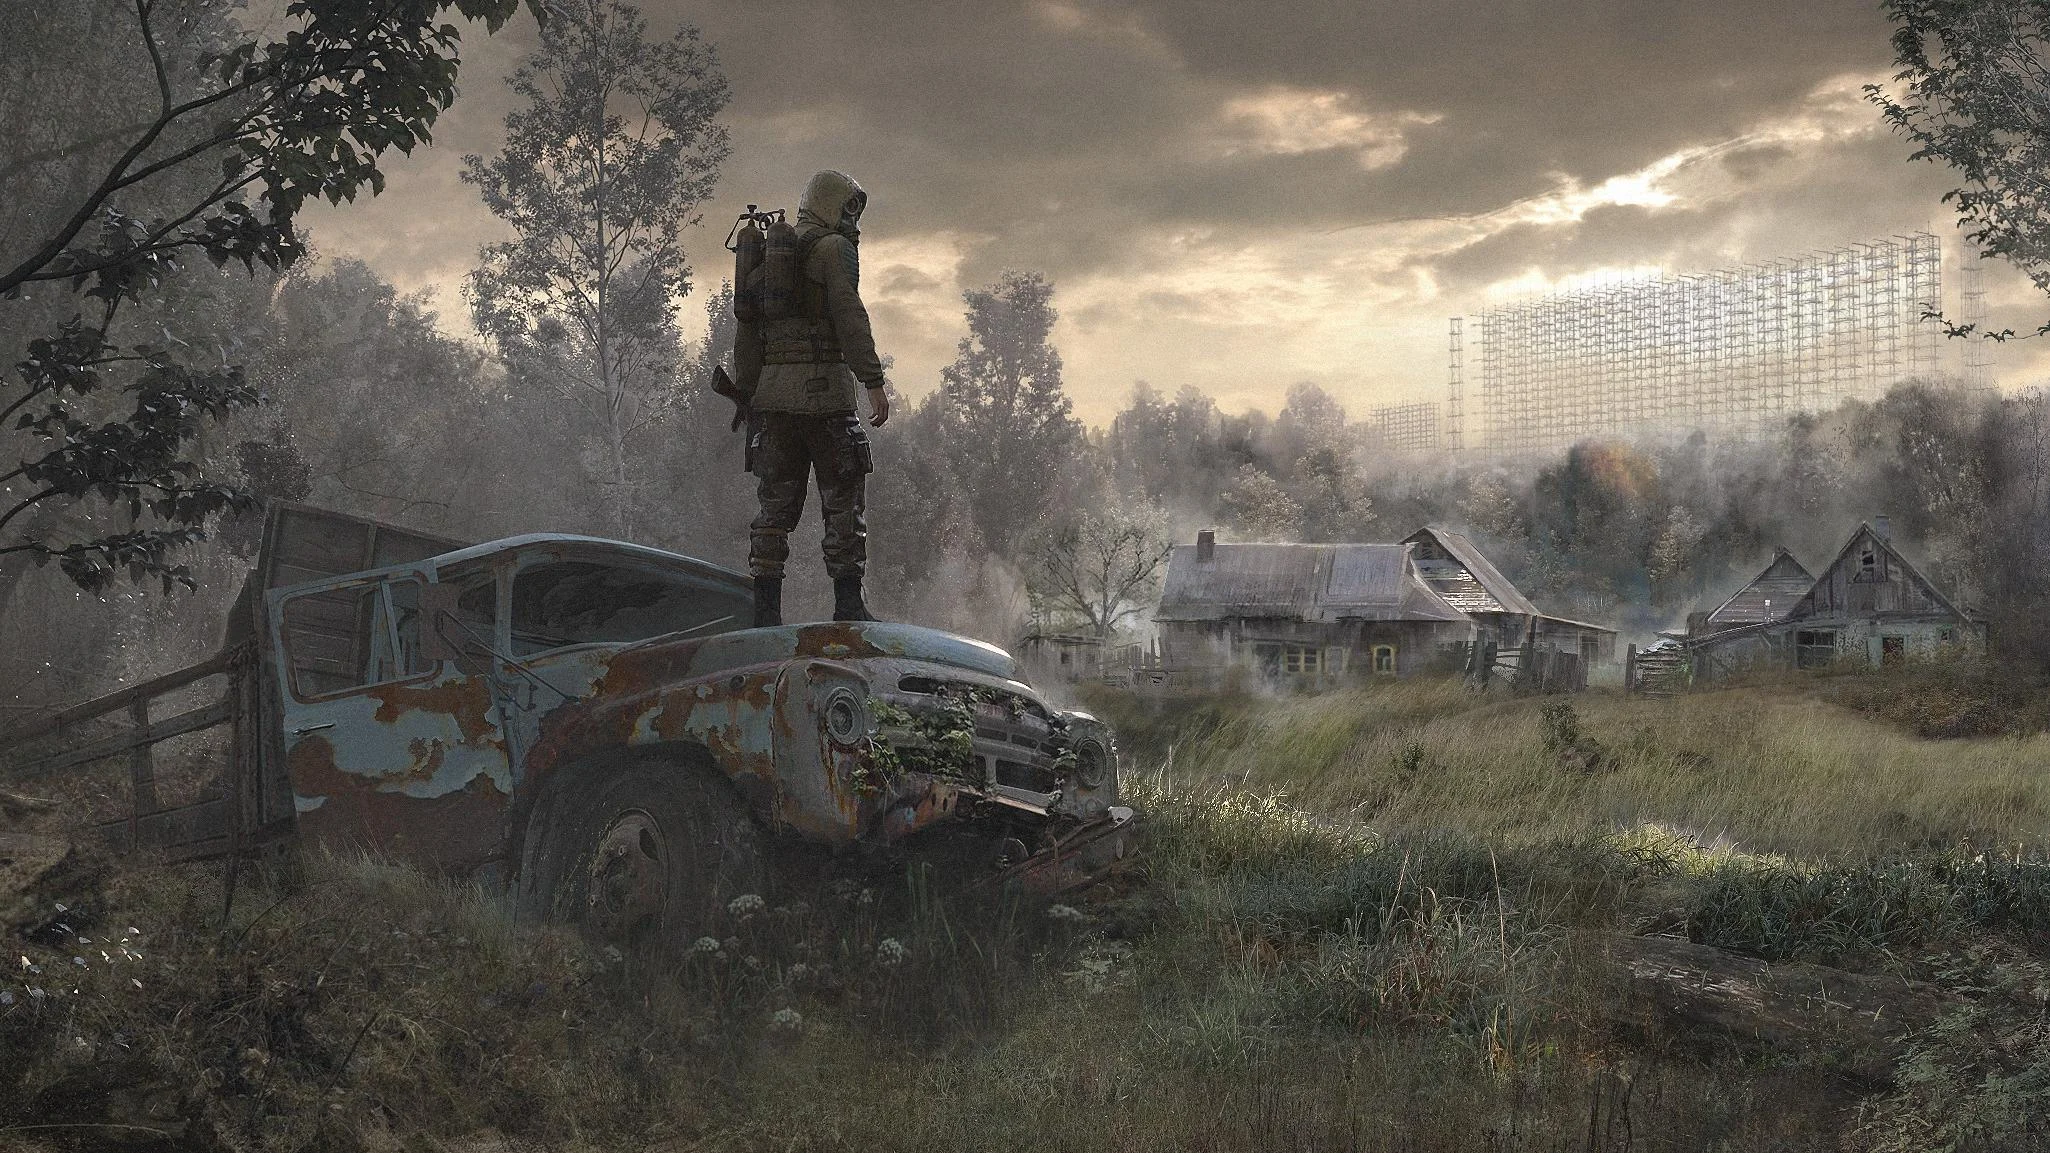 Xbox has added the ability to preload S.T.A.L.K.E.R. 2